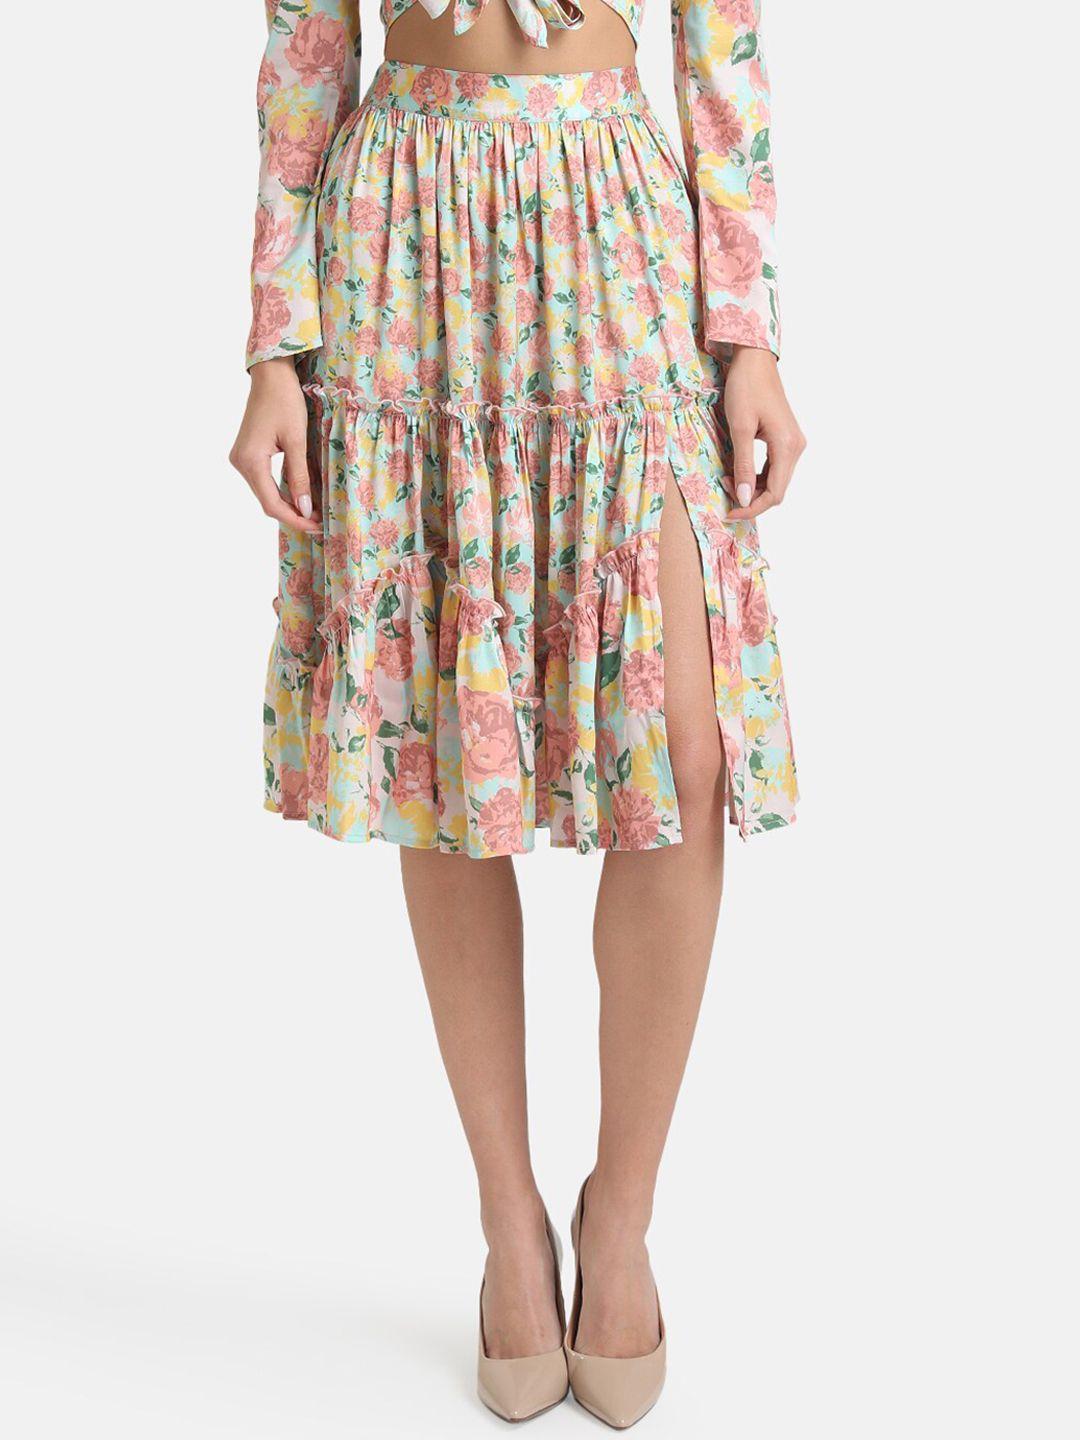 kazo-women-yellow-&-pink-tiered-floral-printed-skirt